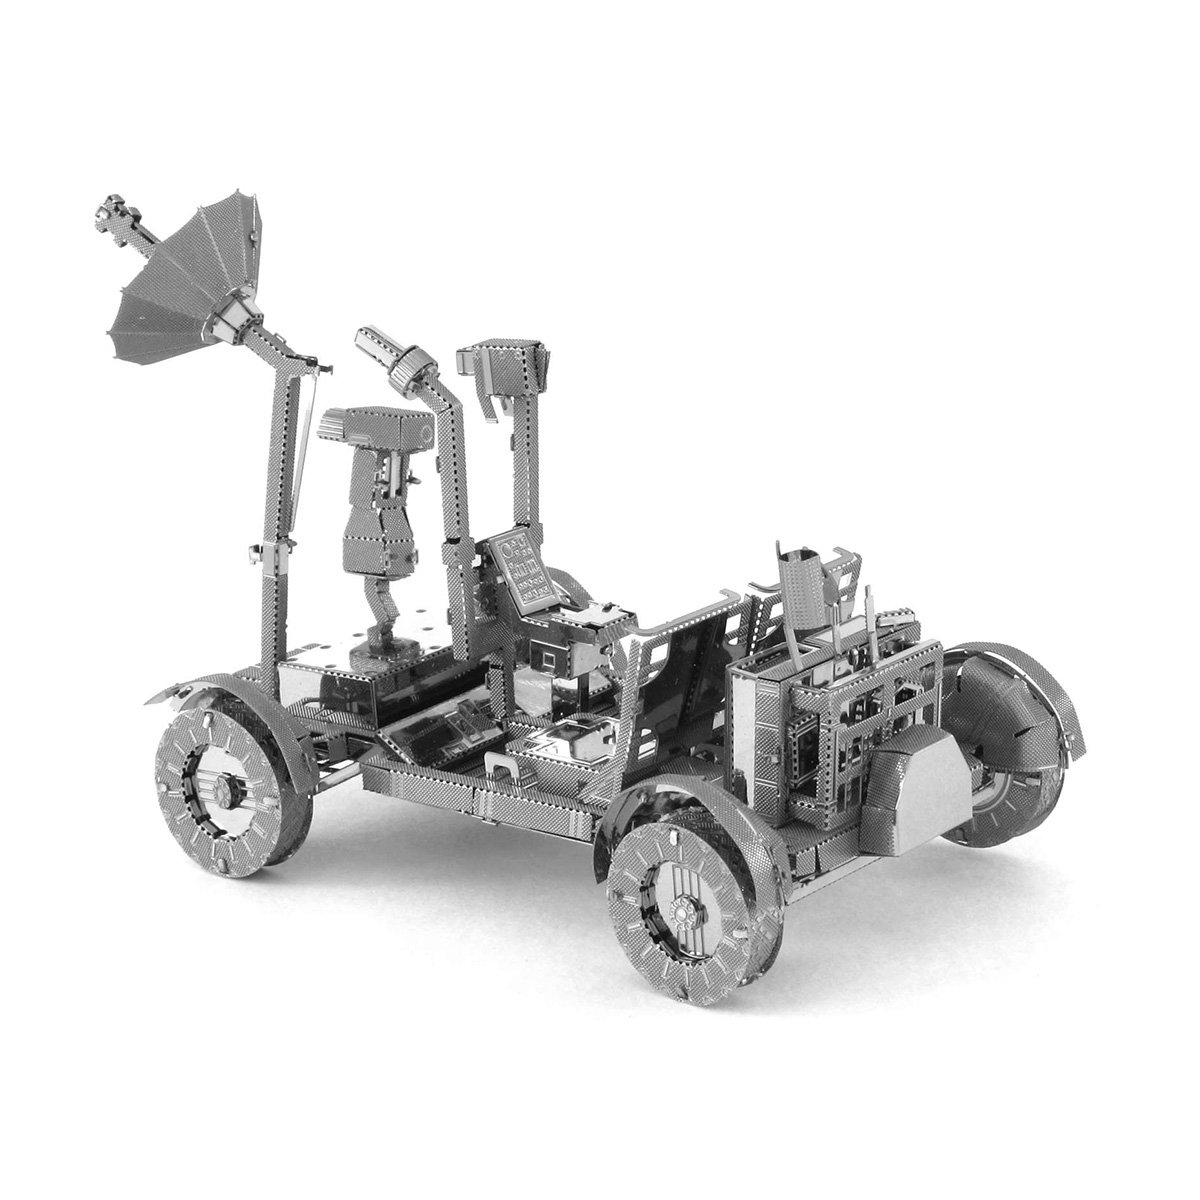 Fascinations Metal Earth Apollo Lunar Rover 3d Miniature Space Vehicle Model for sale online 